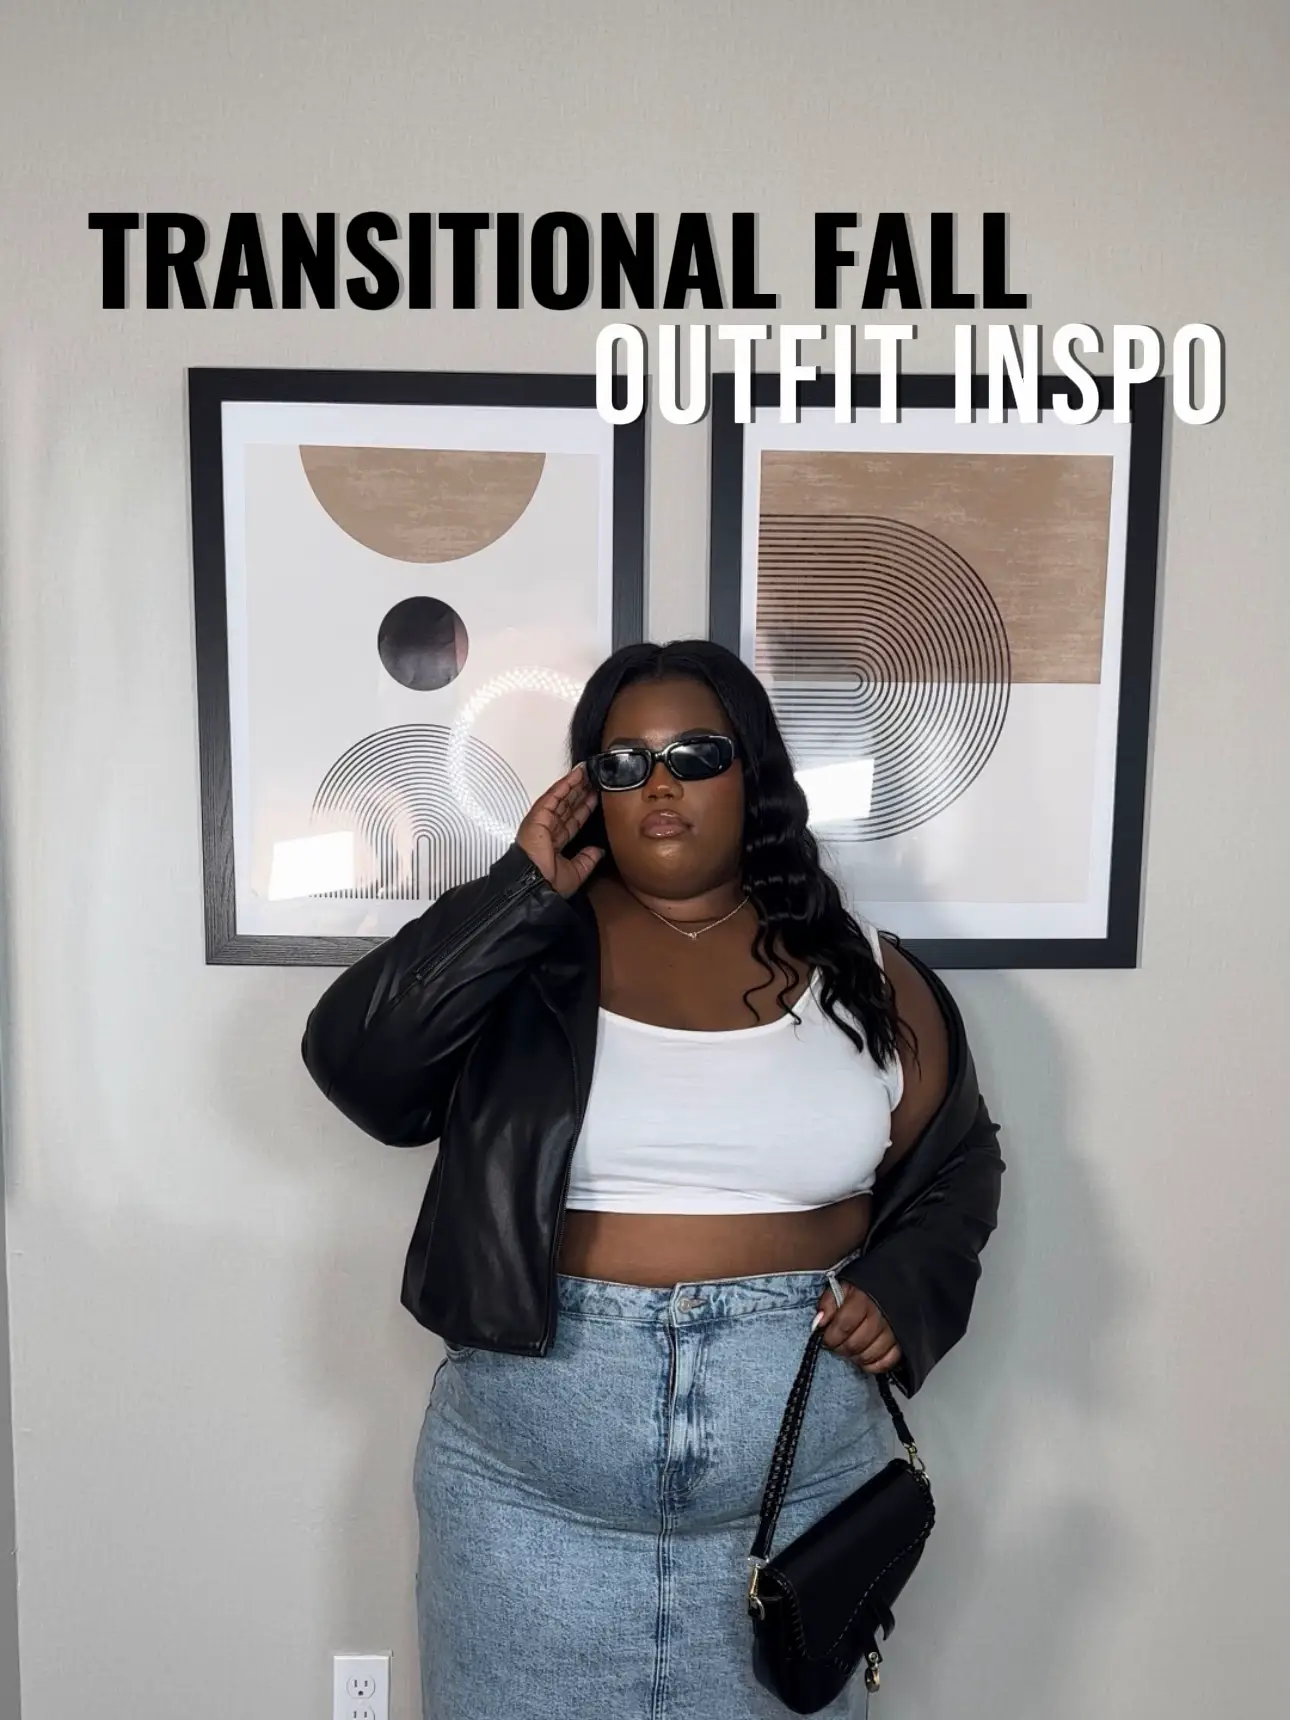 TRANSITIONAL FALL OUTFIT INSPO, Gallery posted by Brianna